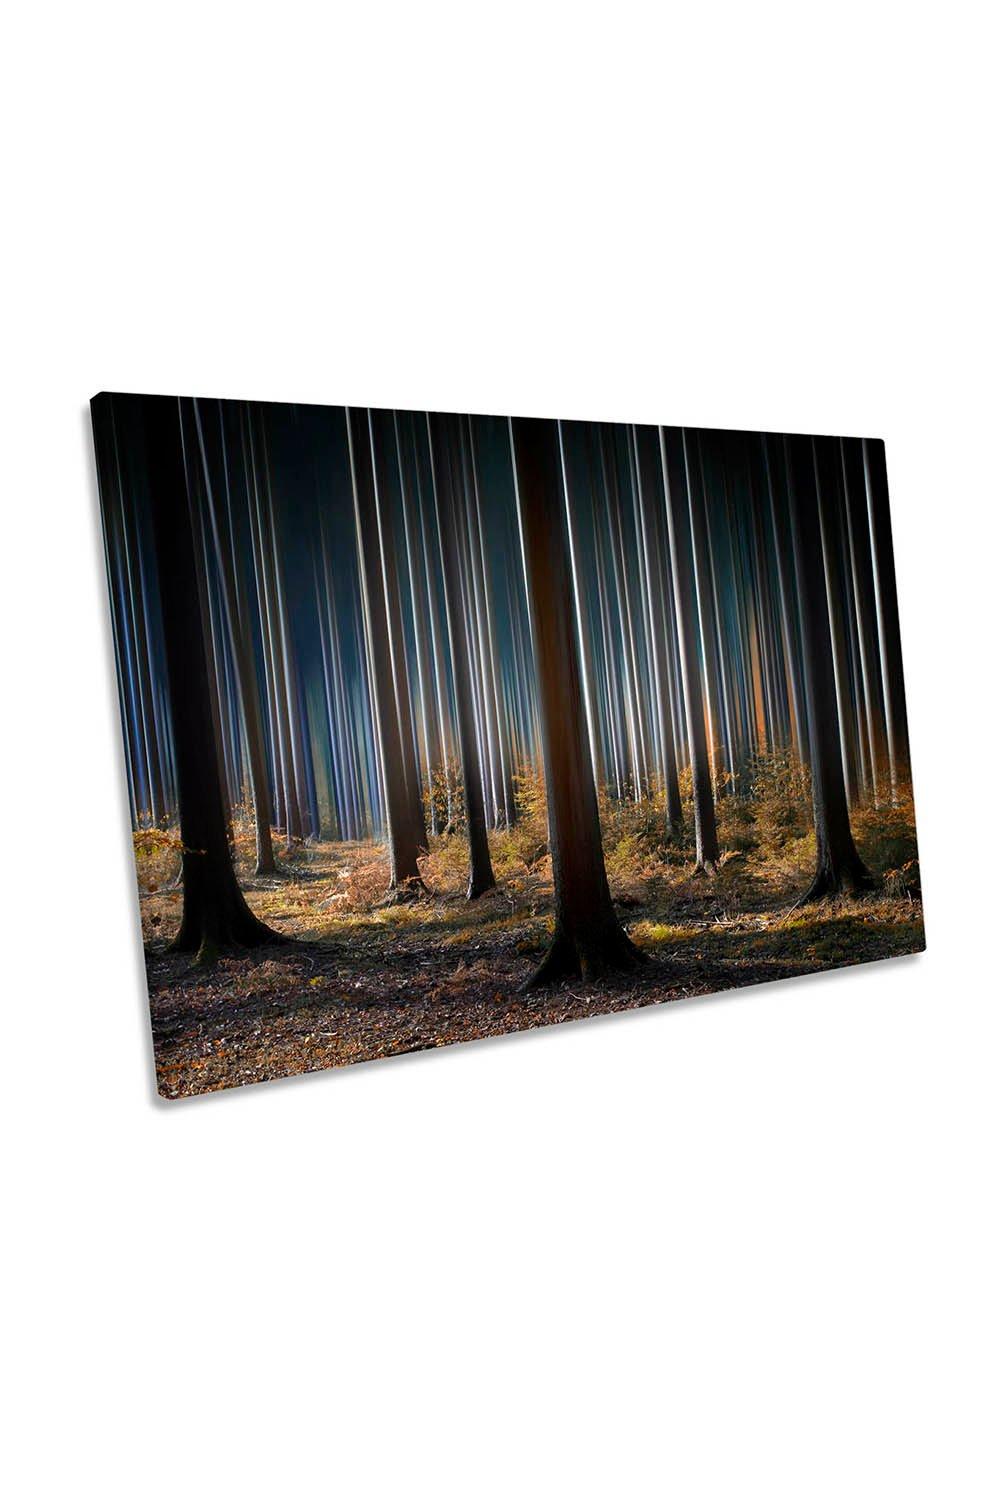 Mystic Wood Forest Night Canvas Wall Art Picture Print